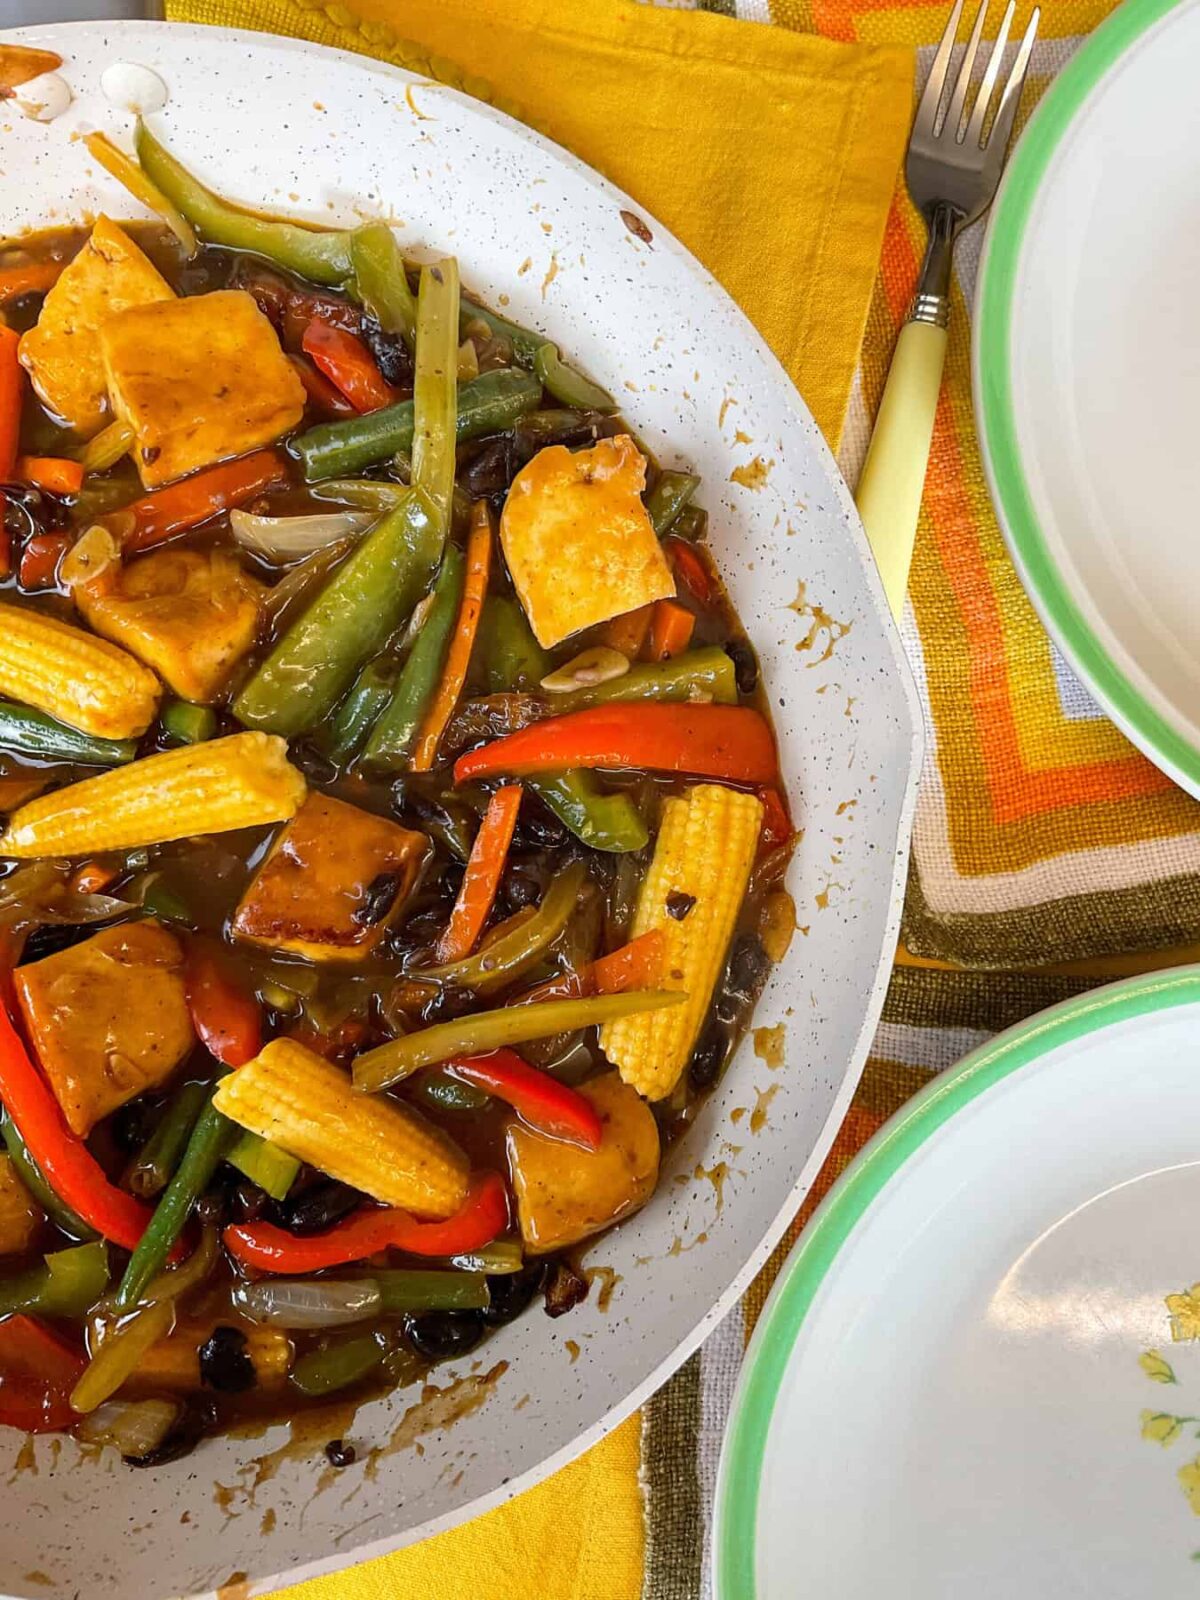 A side view of wok filled with sweet and sour tofu and veggies, with two green rimmed dinner plates to side and orange, brown and yellow striped table mats and yellow handled cutlery forks.